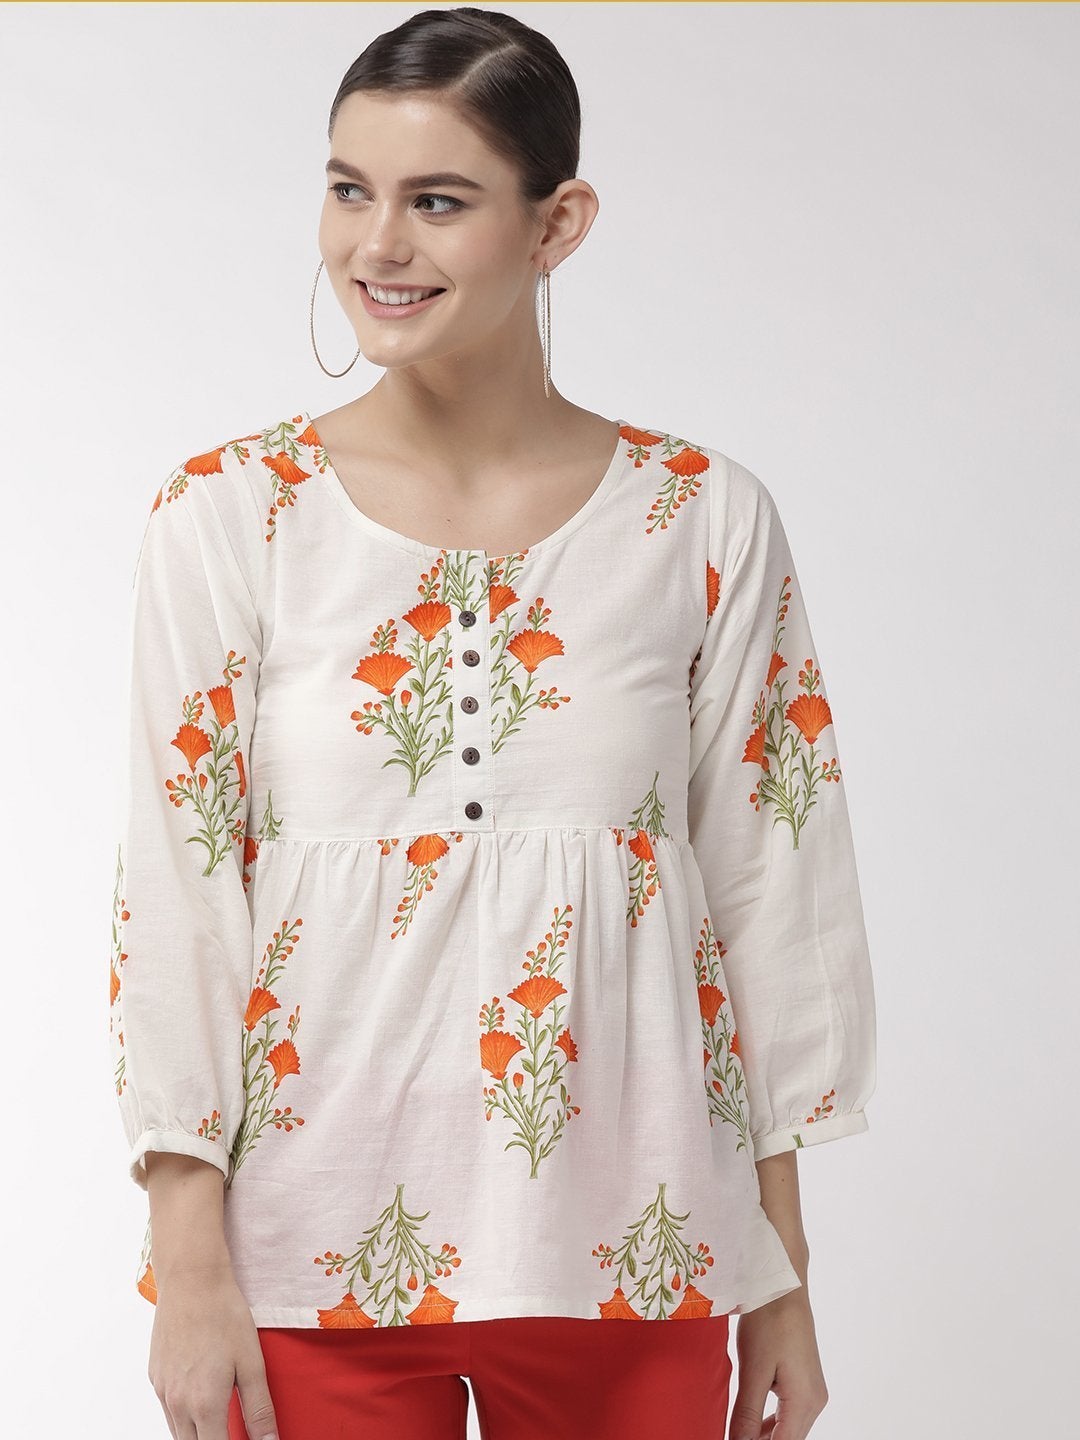 Women's White Floral Top - InWeave